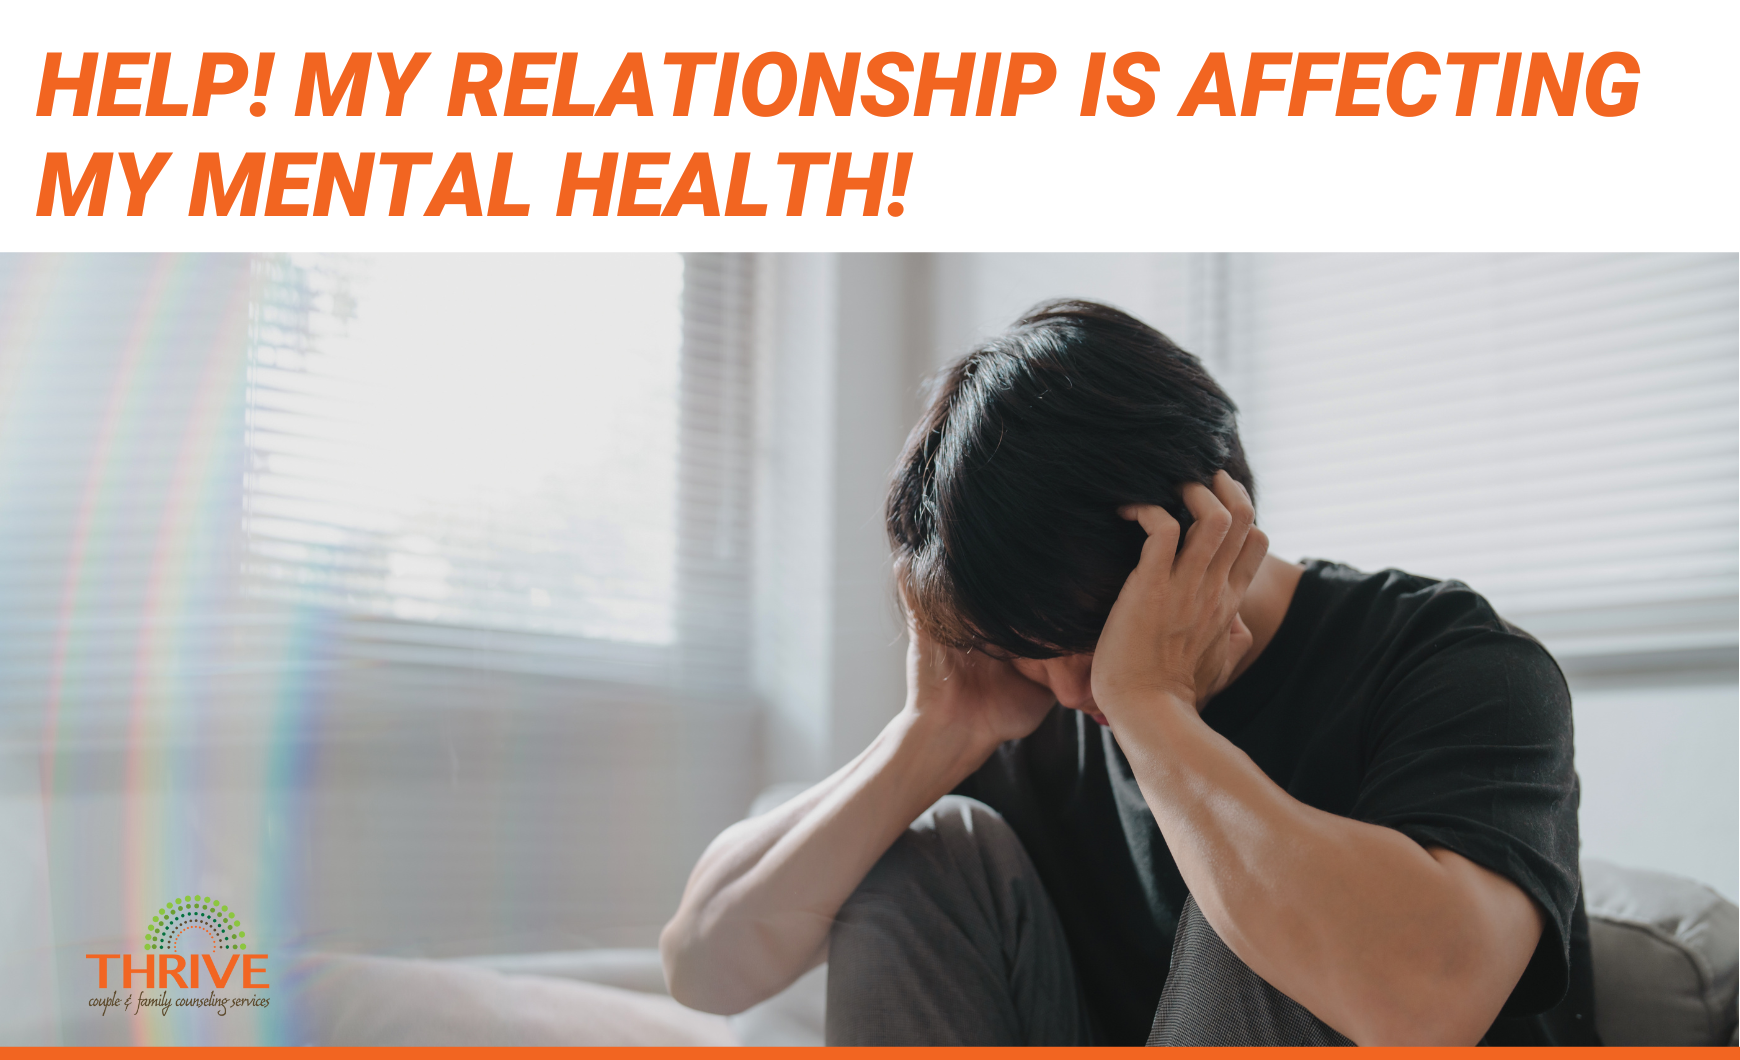 Orange text that reads "Help! My relationship is affecting my mental health" above a photo of a dark haired man holding his head in his hands like he's in distress.